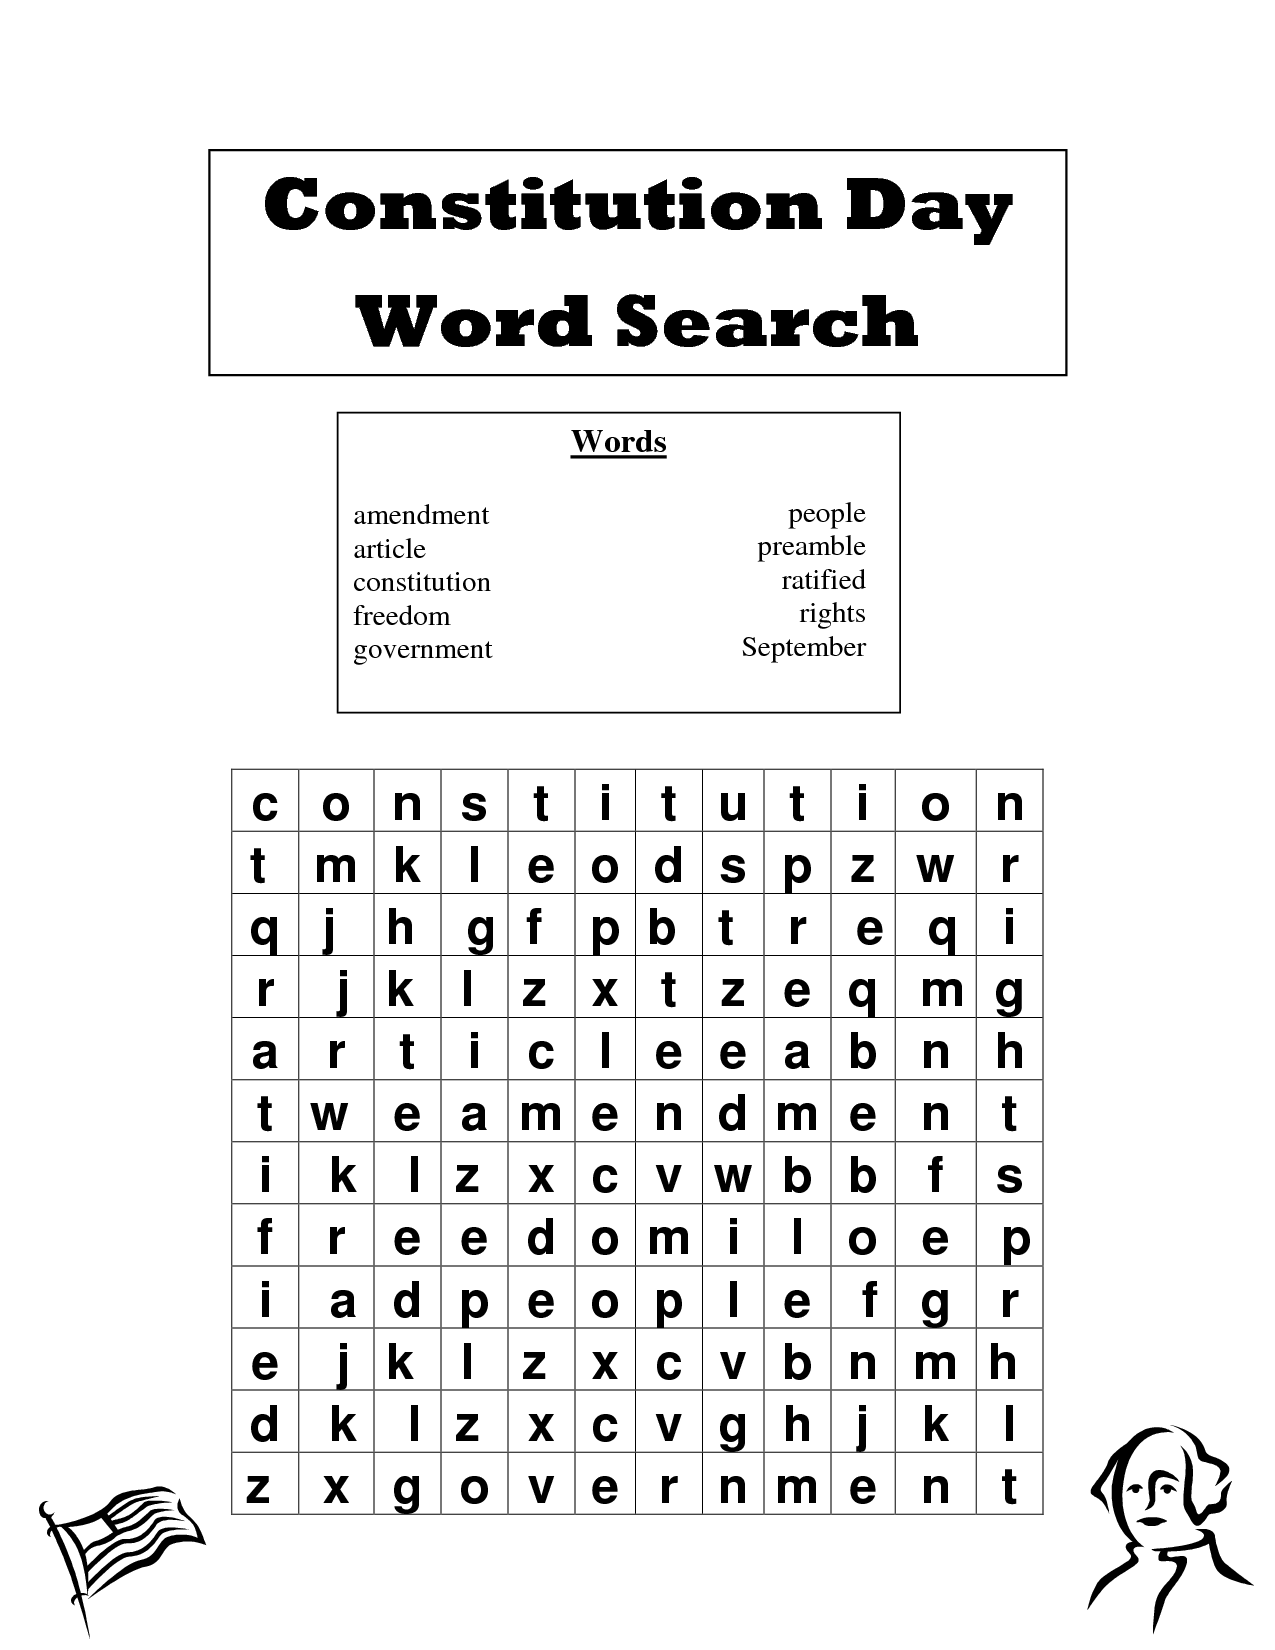 Constitution Day Word Search Image